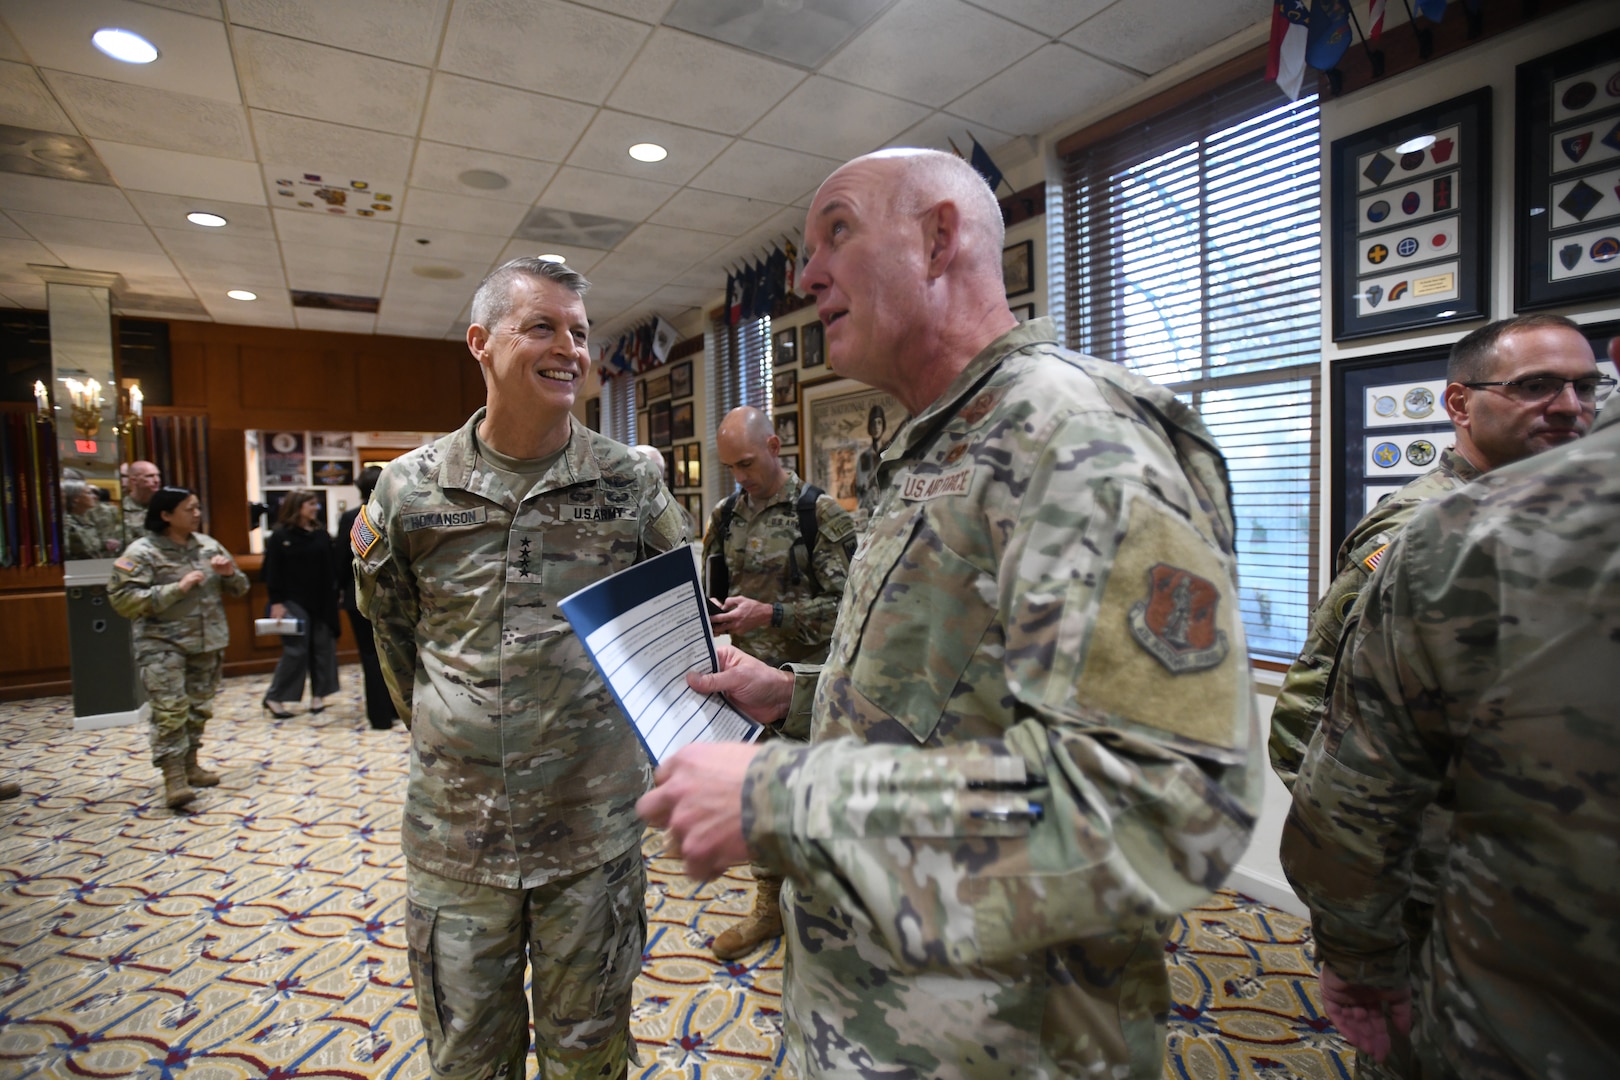 Army Gen. Daniel Hokanson, left, chief of the National Guard Bureau, chats with Air Force Maj. Gen. John P. Hronek, the adjutant general of the Montana National Guard, during the opening ceremony at The 1636 Room at Joint Base Myer-Henderson Hall’s Patton Hall in Arlington, Virginia, Nov. 1, 2023. Named in recognition of the first organized militia in the Massachusetts Bay Colony in 1636 – the predecessor of today’s National Guard – the exhibit space runs the gamut of strategically placed artifacts, framed flags, panel displays, photographs, visual arts and replicated items.